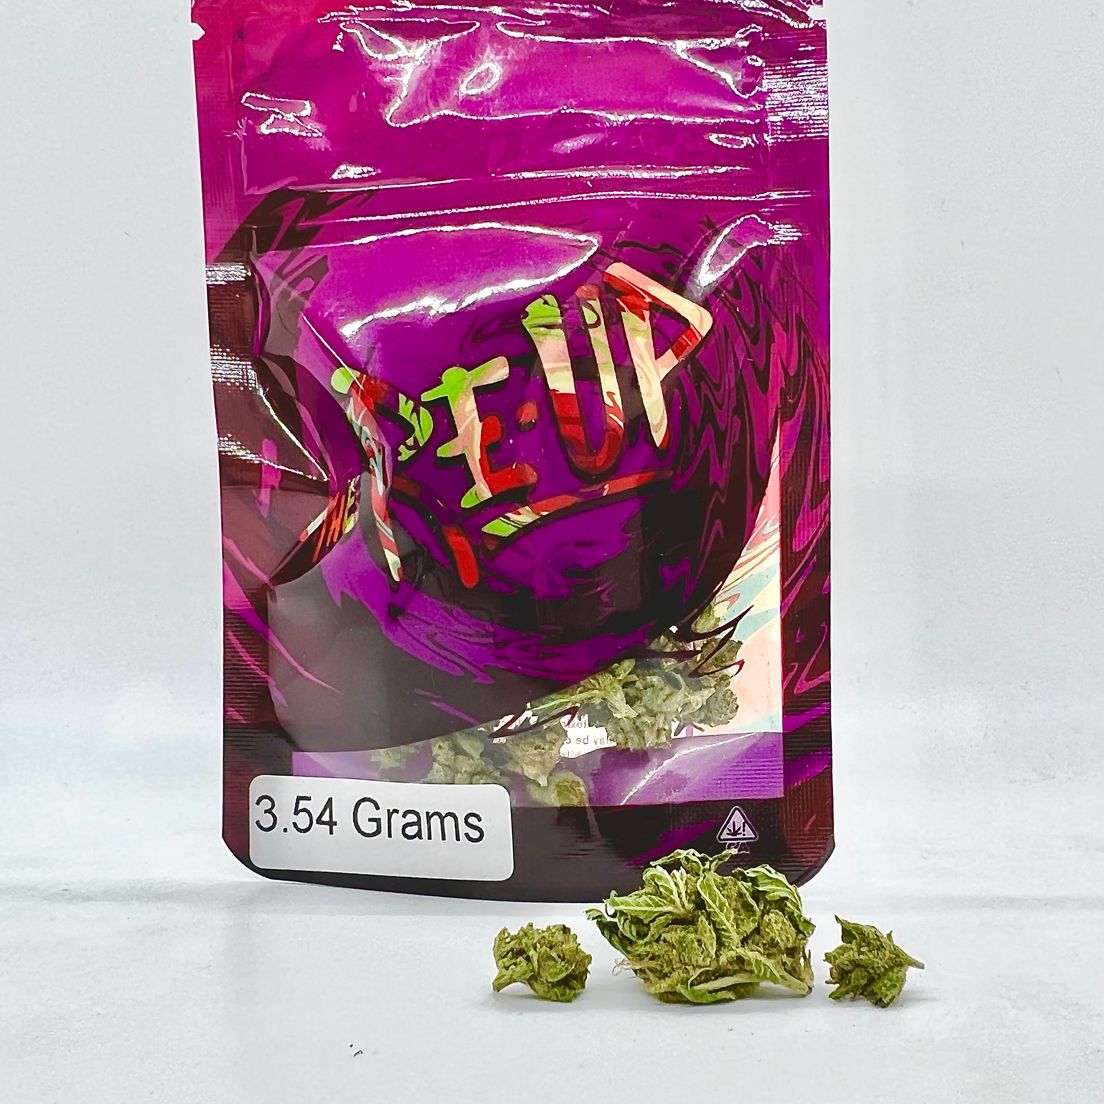 *BLOWOUT DEAL! $25 1/8 Sour Diesel (25.1%/Sativa) - The Re-Up *Disclaimer*